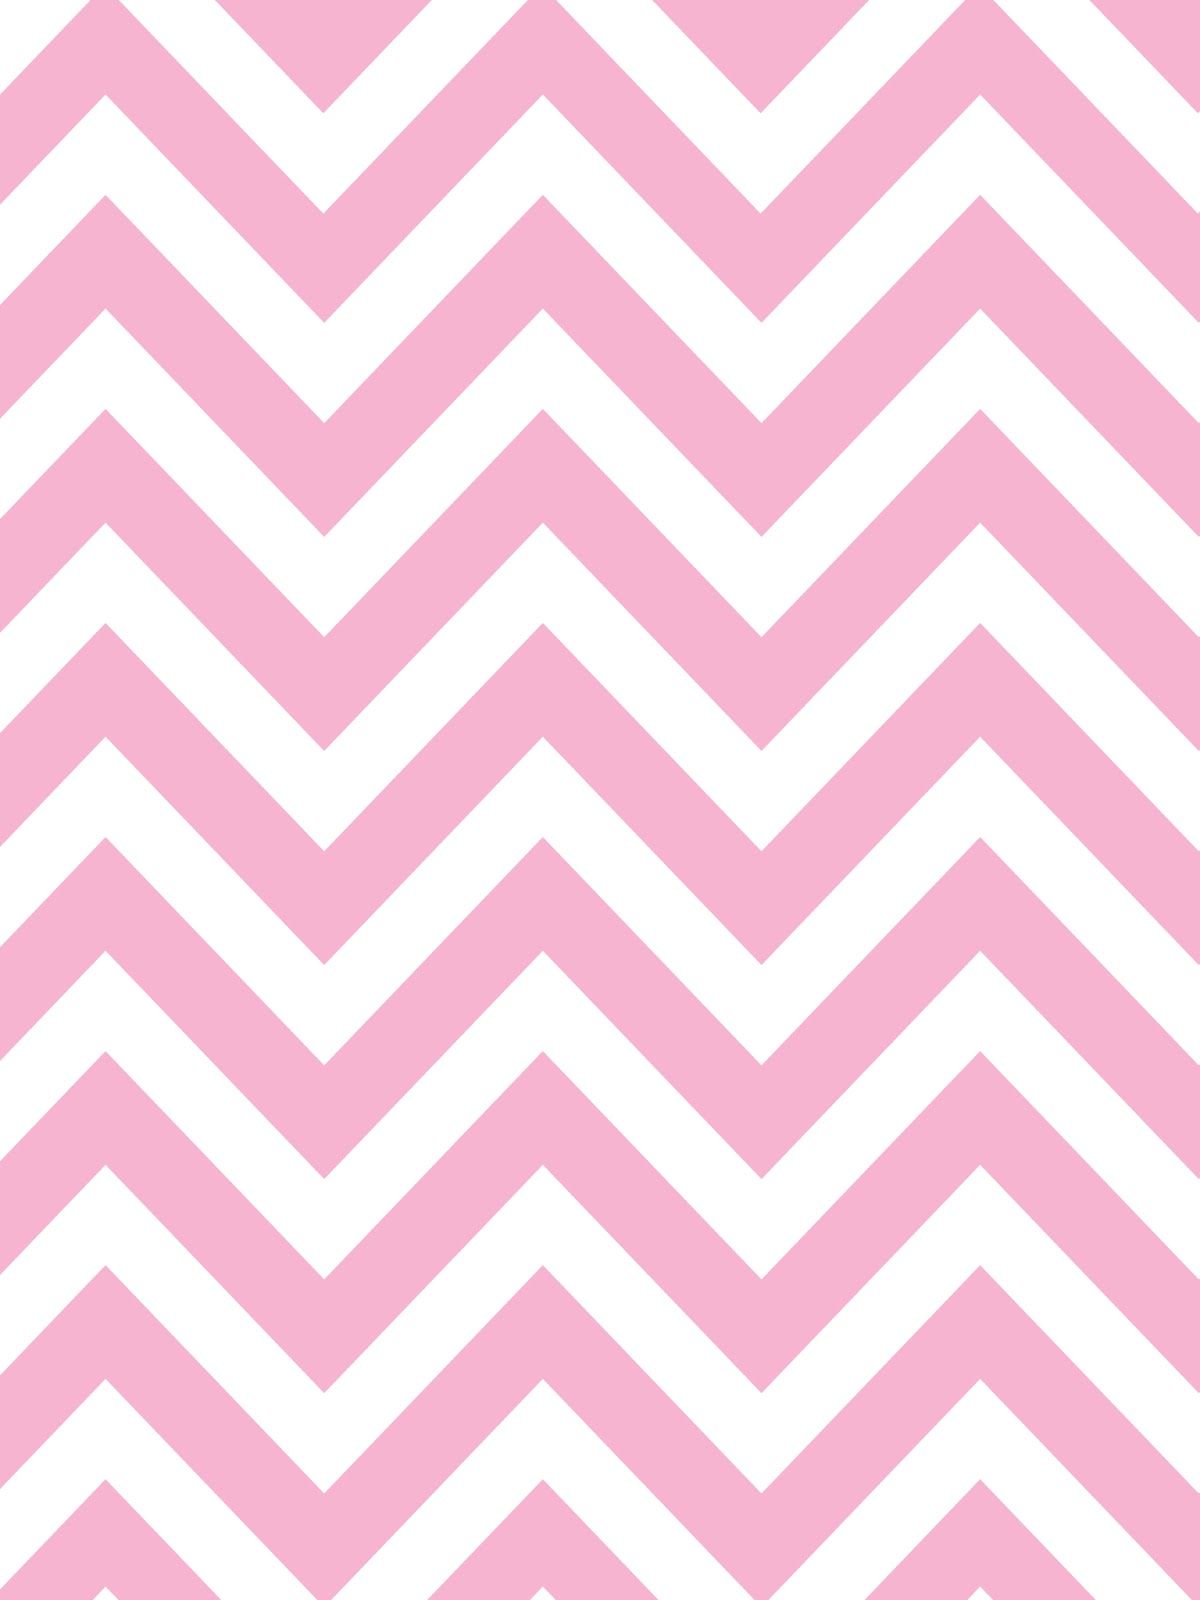 Make itCreate Printables & Backgrounds / Wallpapers Chevron